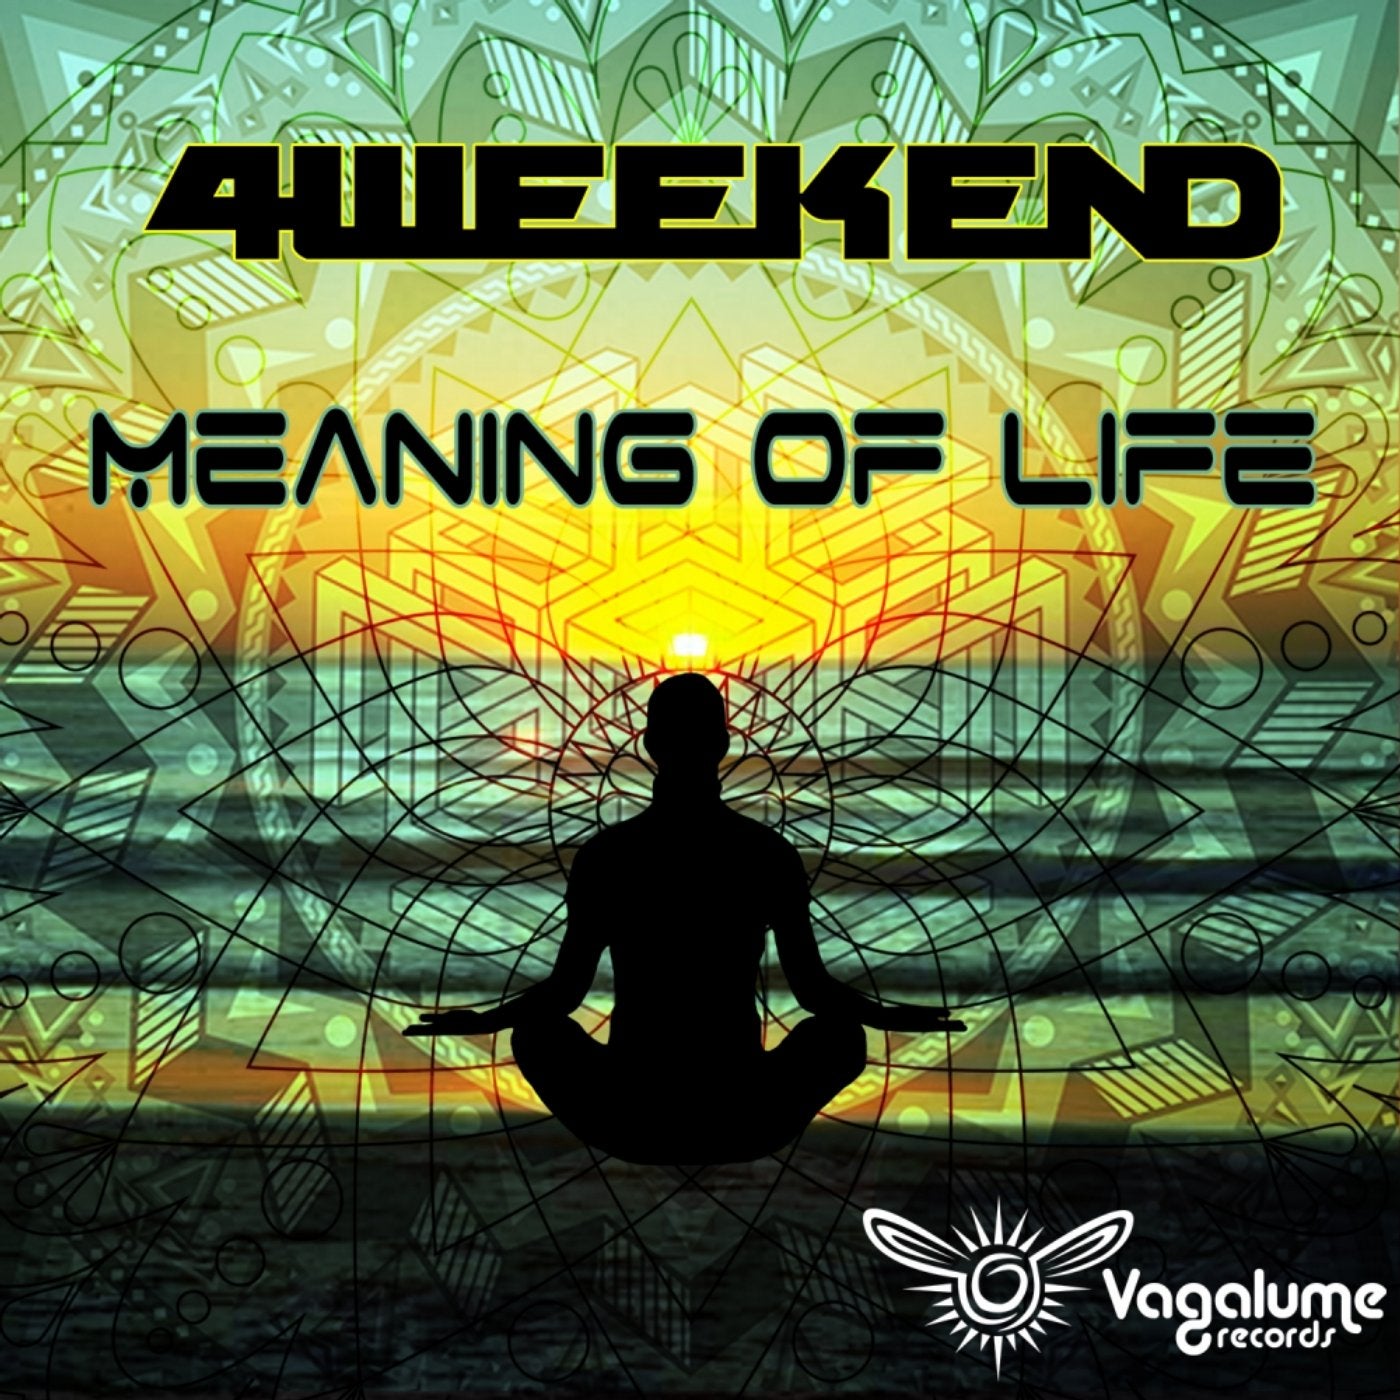 Weekend meaning. Meaning of Life. Galume.